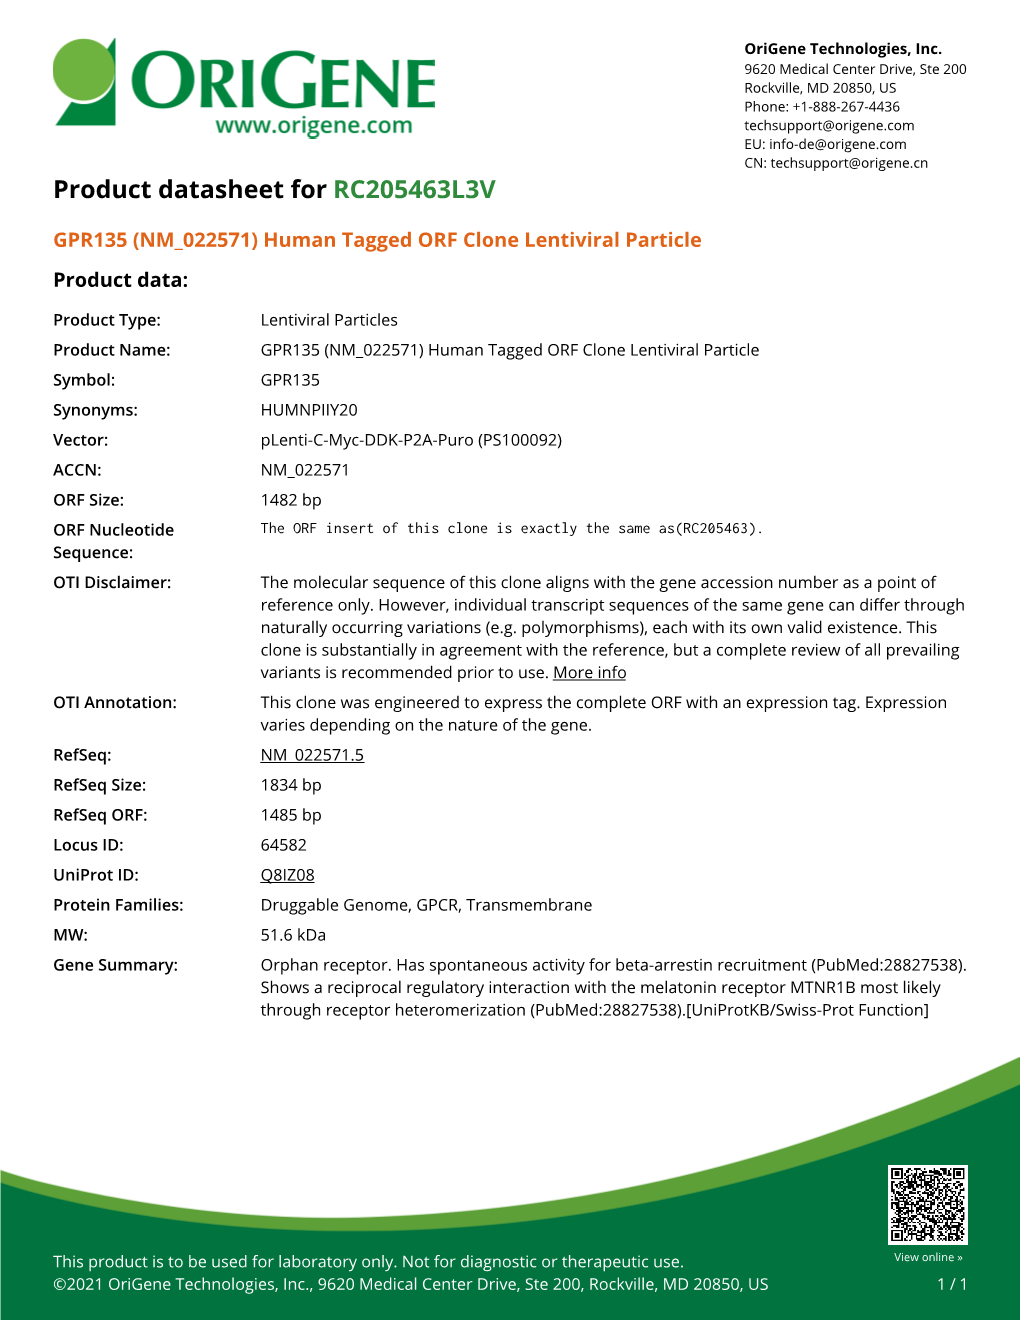 GPR135 (NM 022571) Human Tagged ORF Clone Lentiviral Particle Product Data